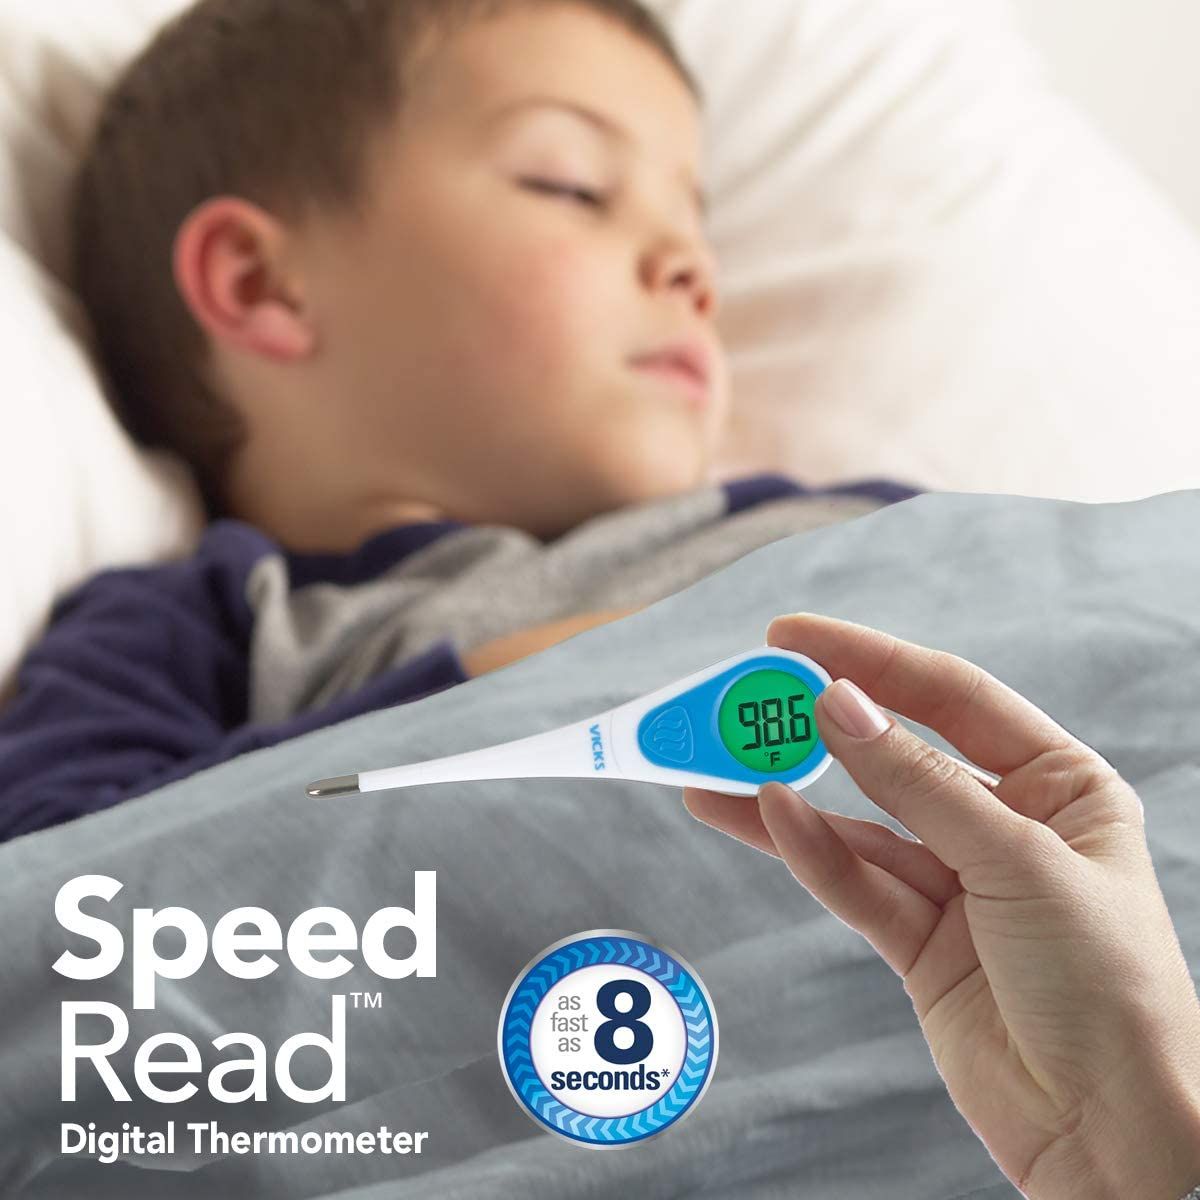 Vicks SpeedRead Digital Thermometer V912 with Fever InSight Technology